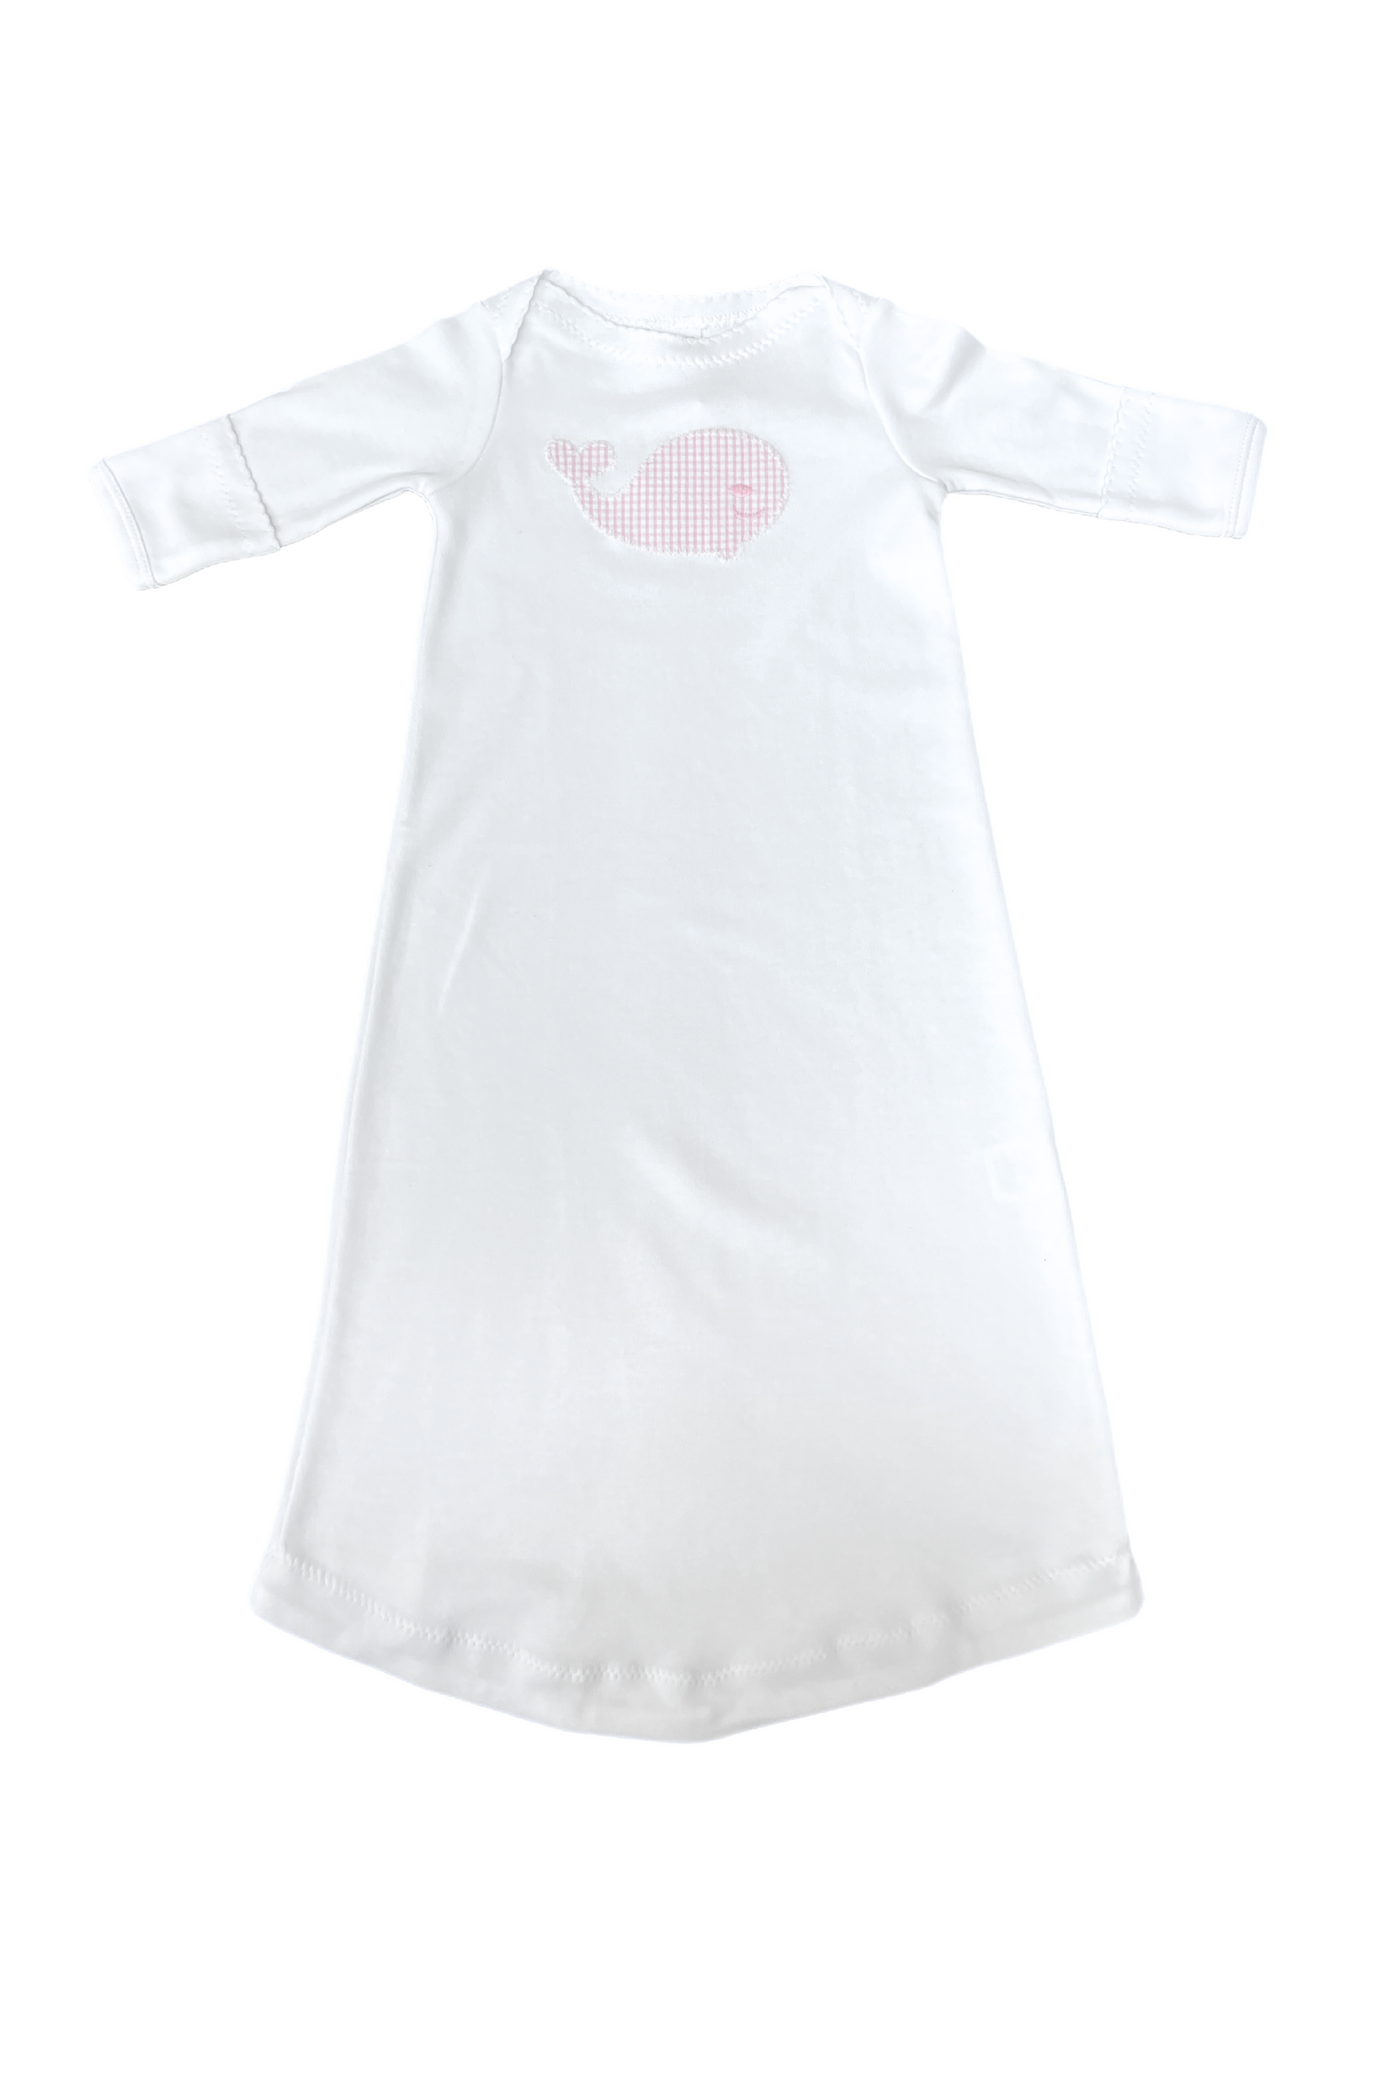 JJ Applique Day Gown Pink Windowpane Whale